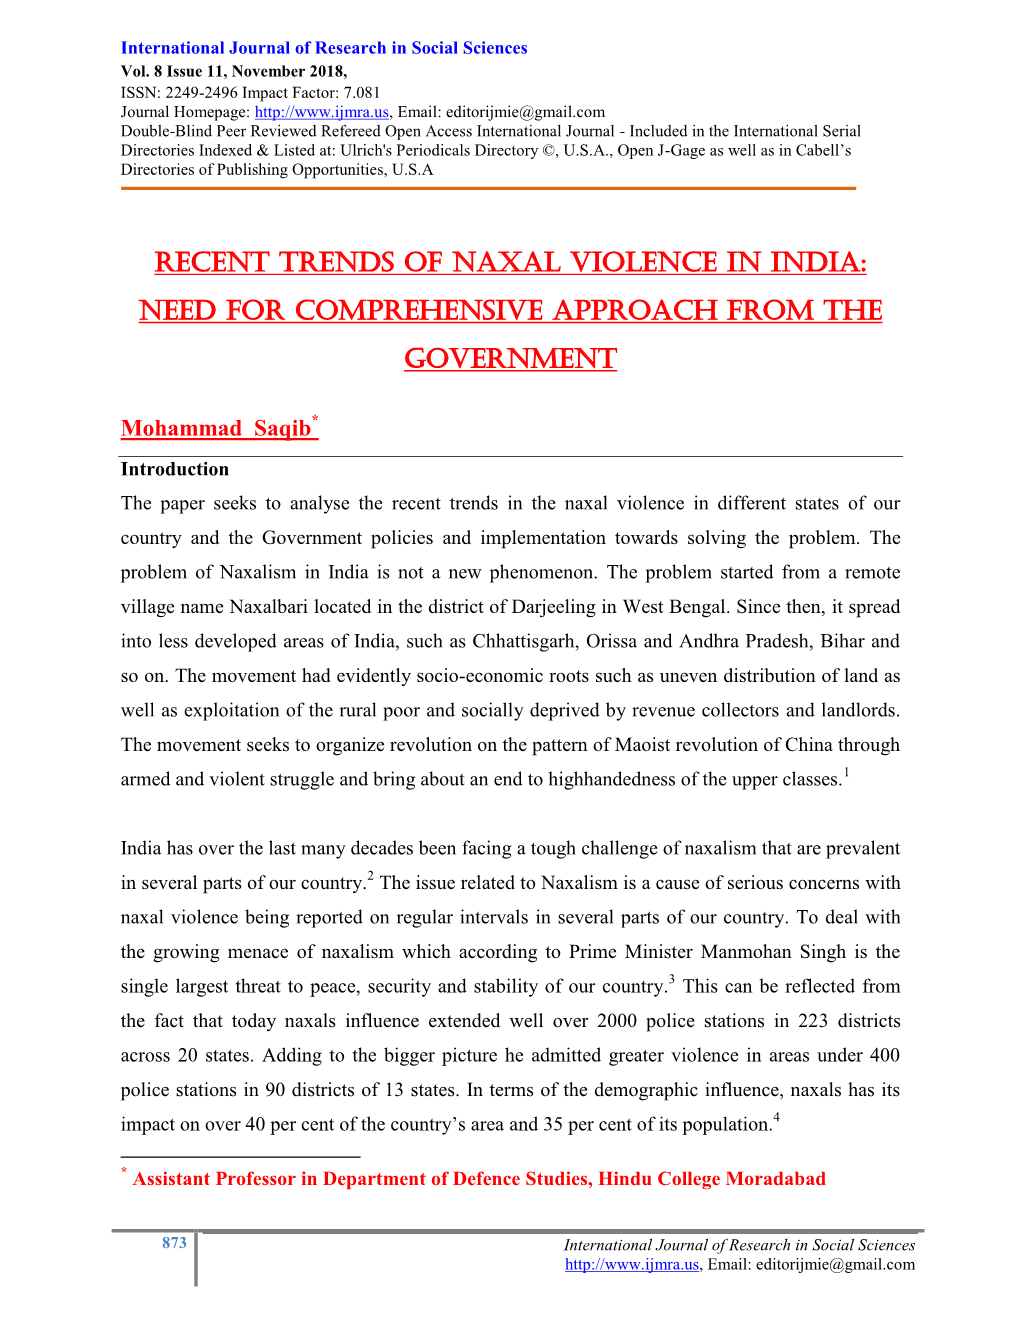 Recent Trends of Naxal Violence in India: Need for Comprehensive Approach from the Government